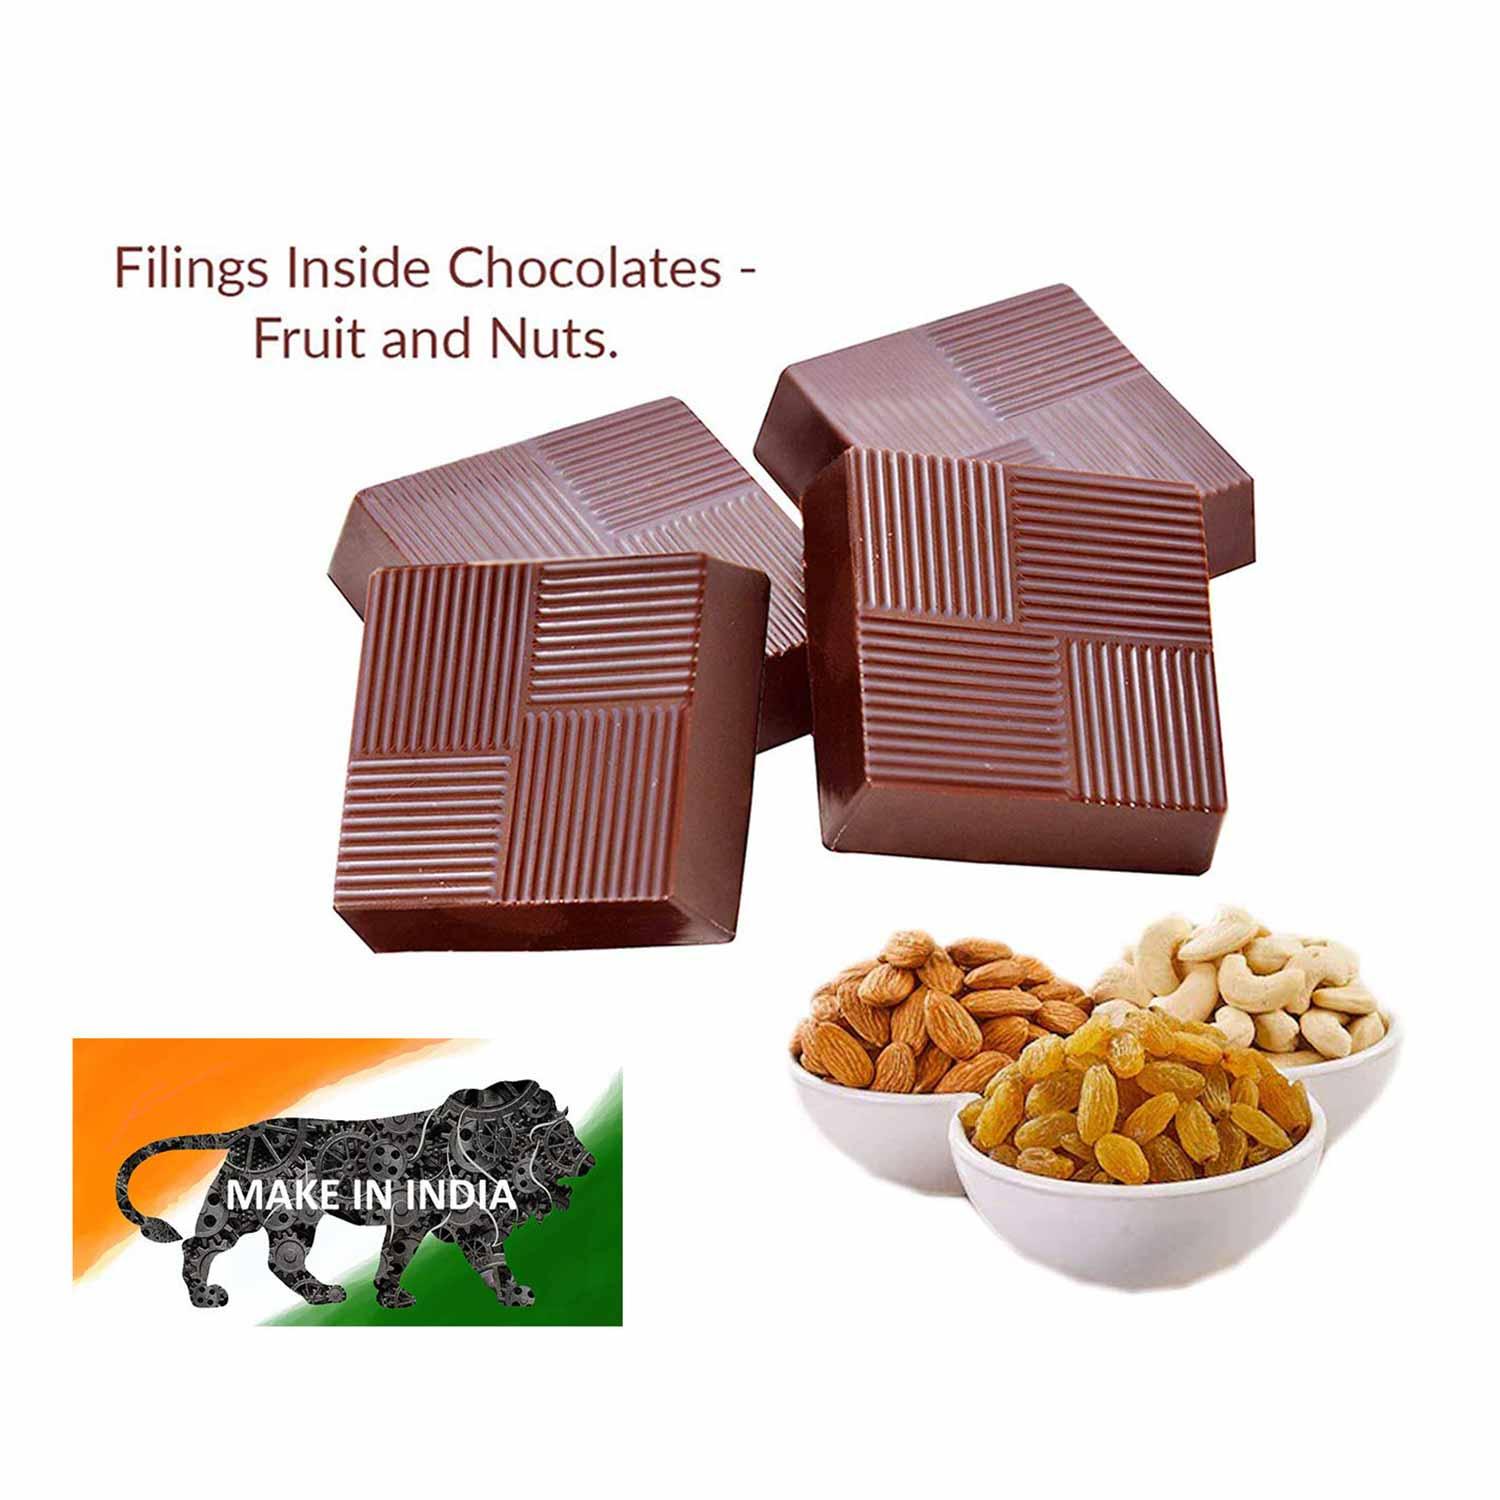 Name printed customised chocolate wrappers - Choco Manual ART